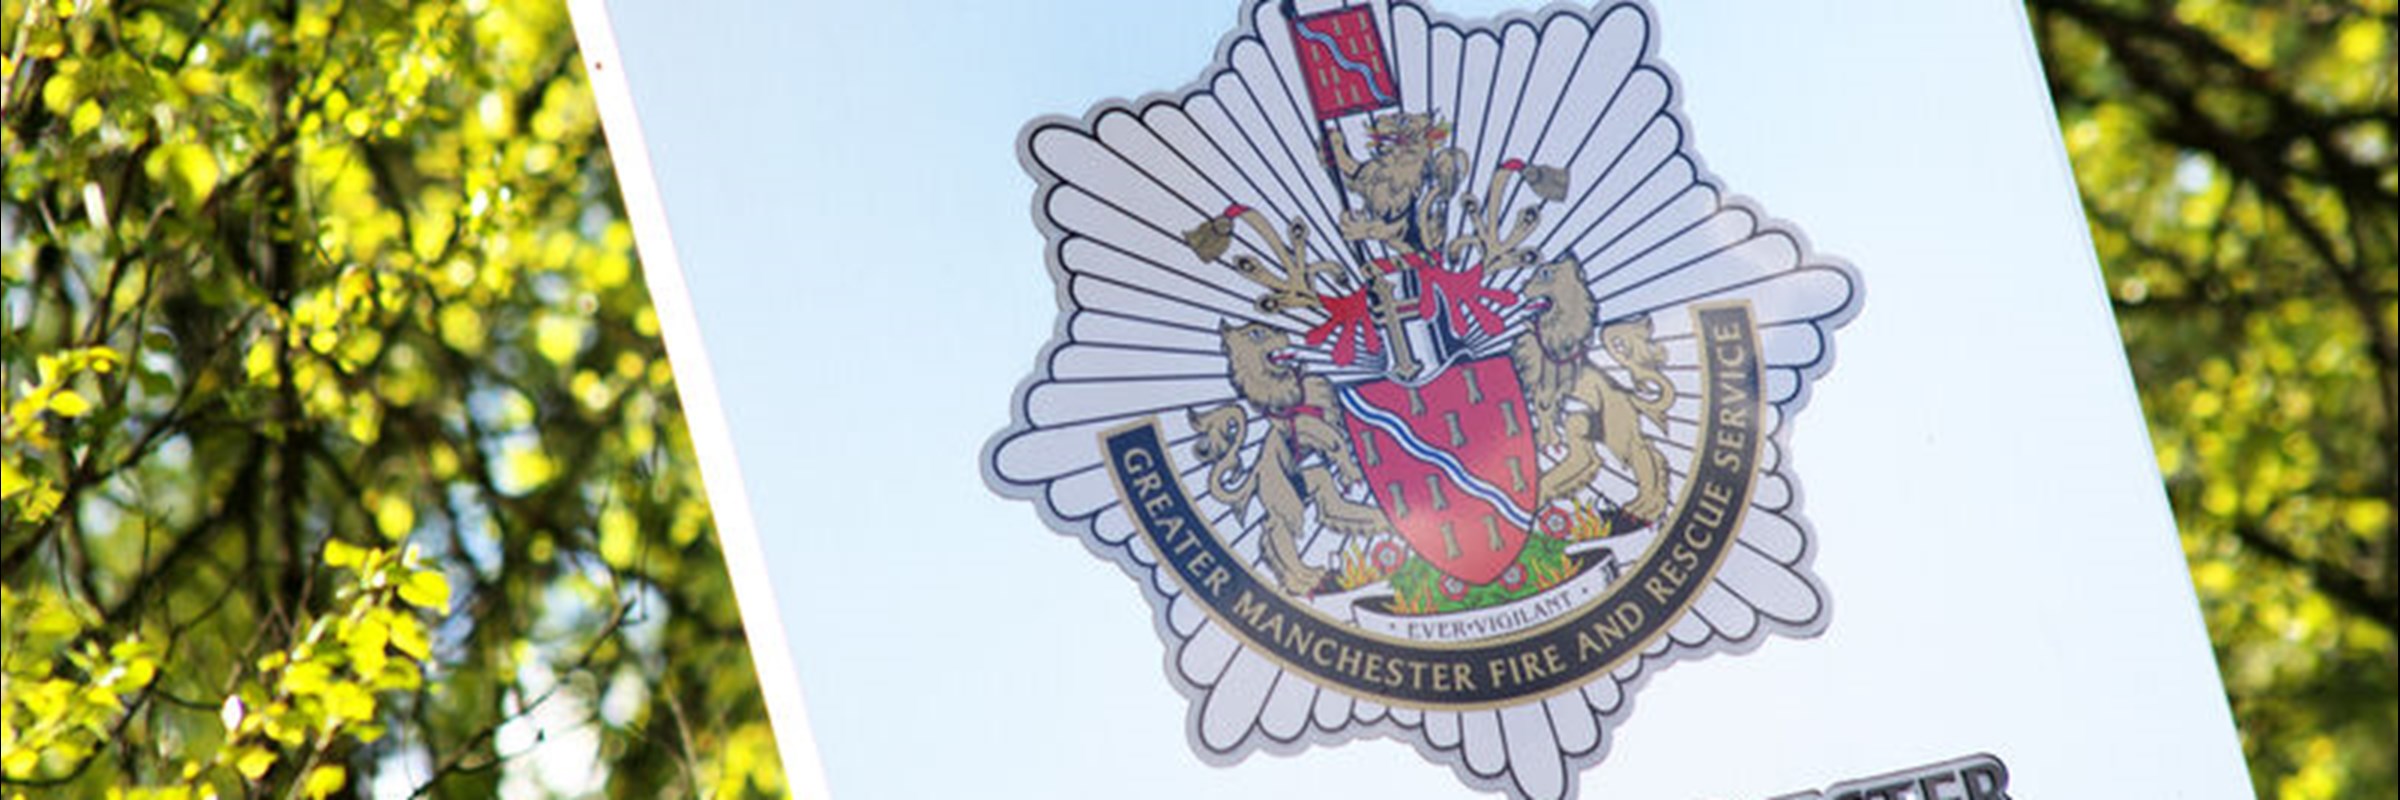 Greater Manchester Fire and Rescue Service emblem